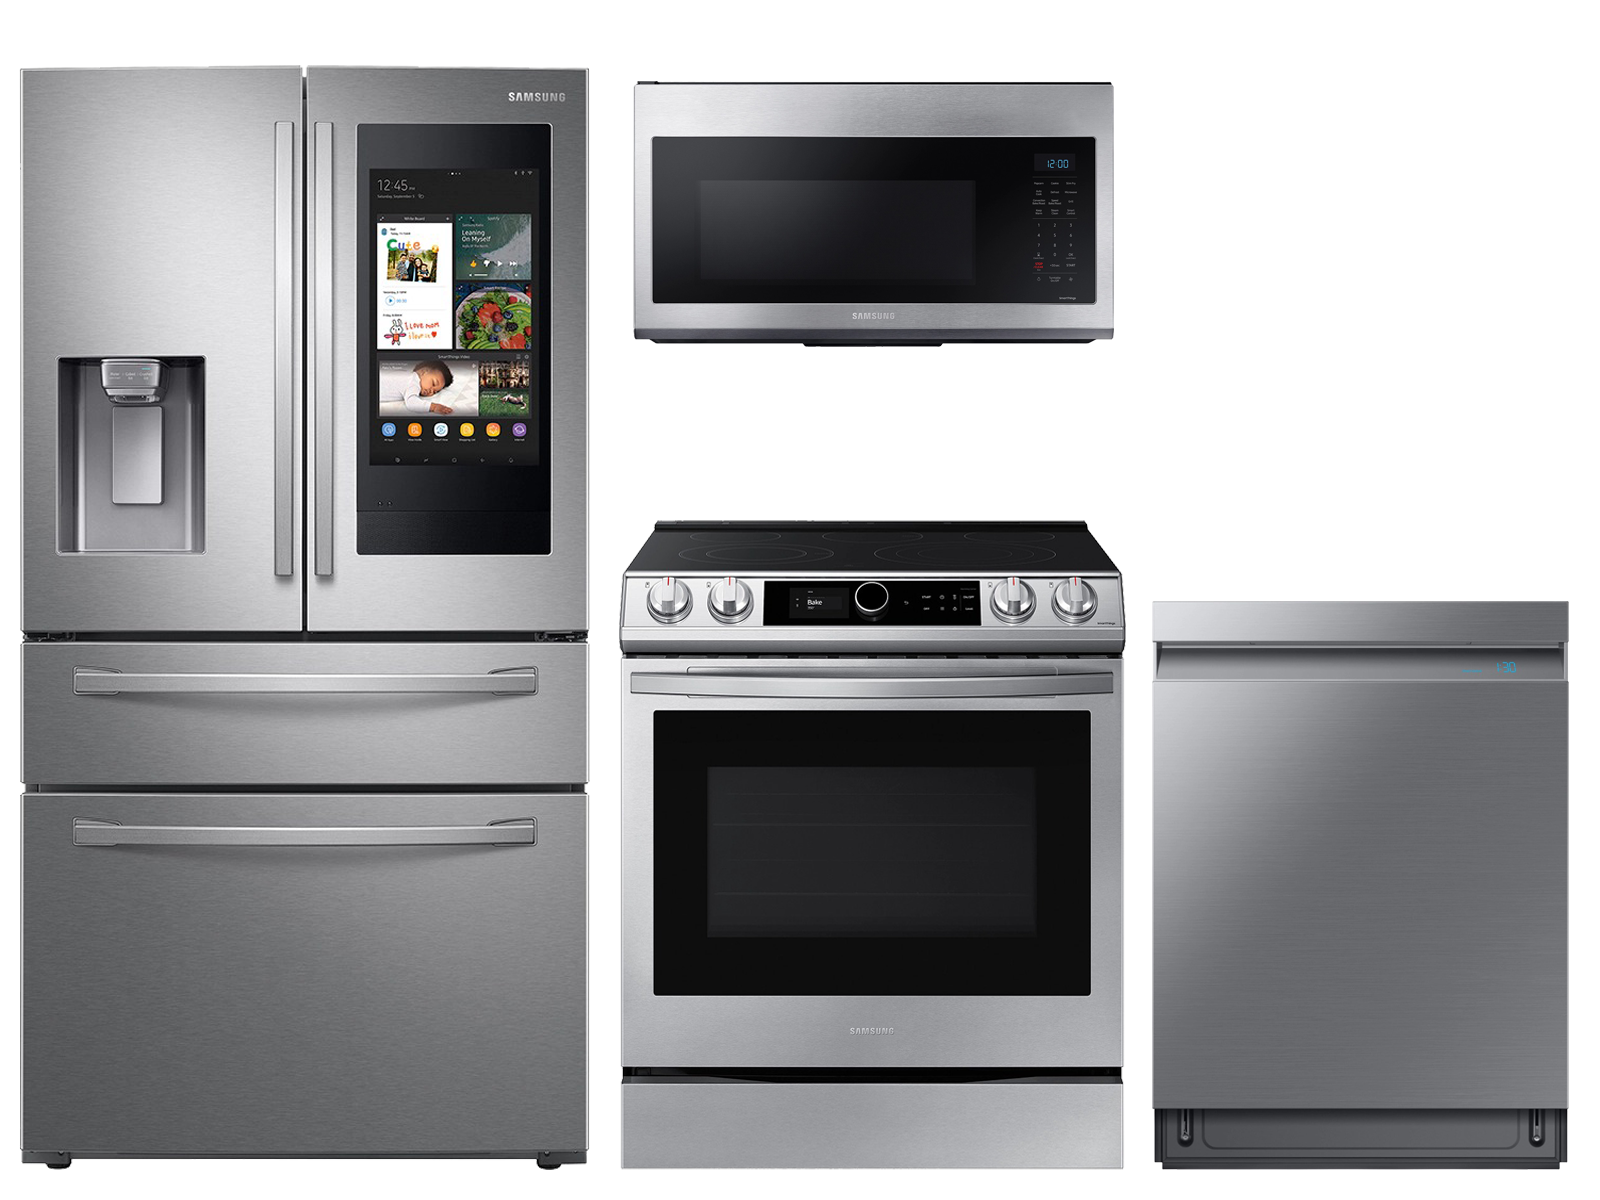 28 cu. ft. Touch Screen Family HubTM 4-door refrigerator, 6.3 cu. ft. electric range, microwave and Smart Linear dishwasher package